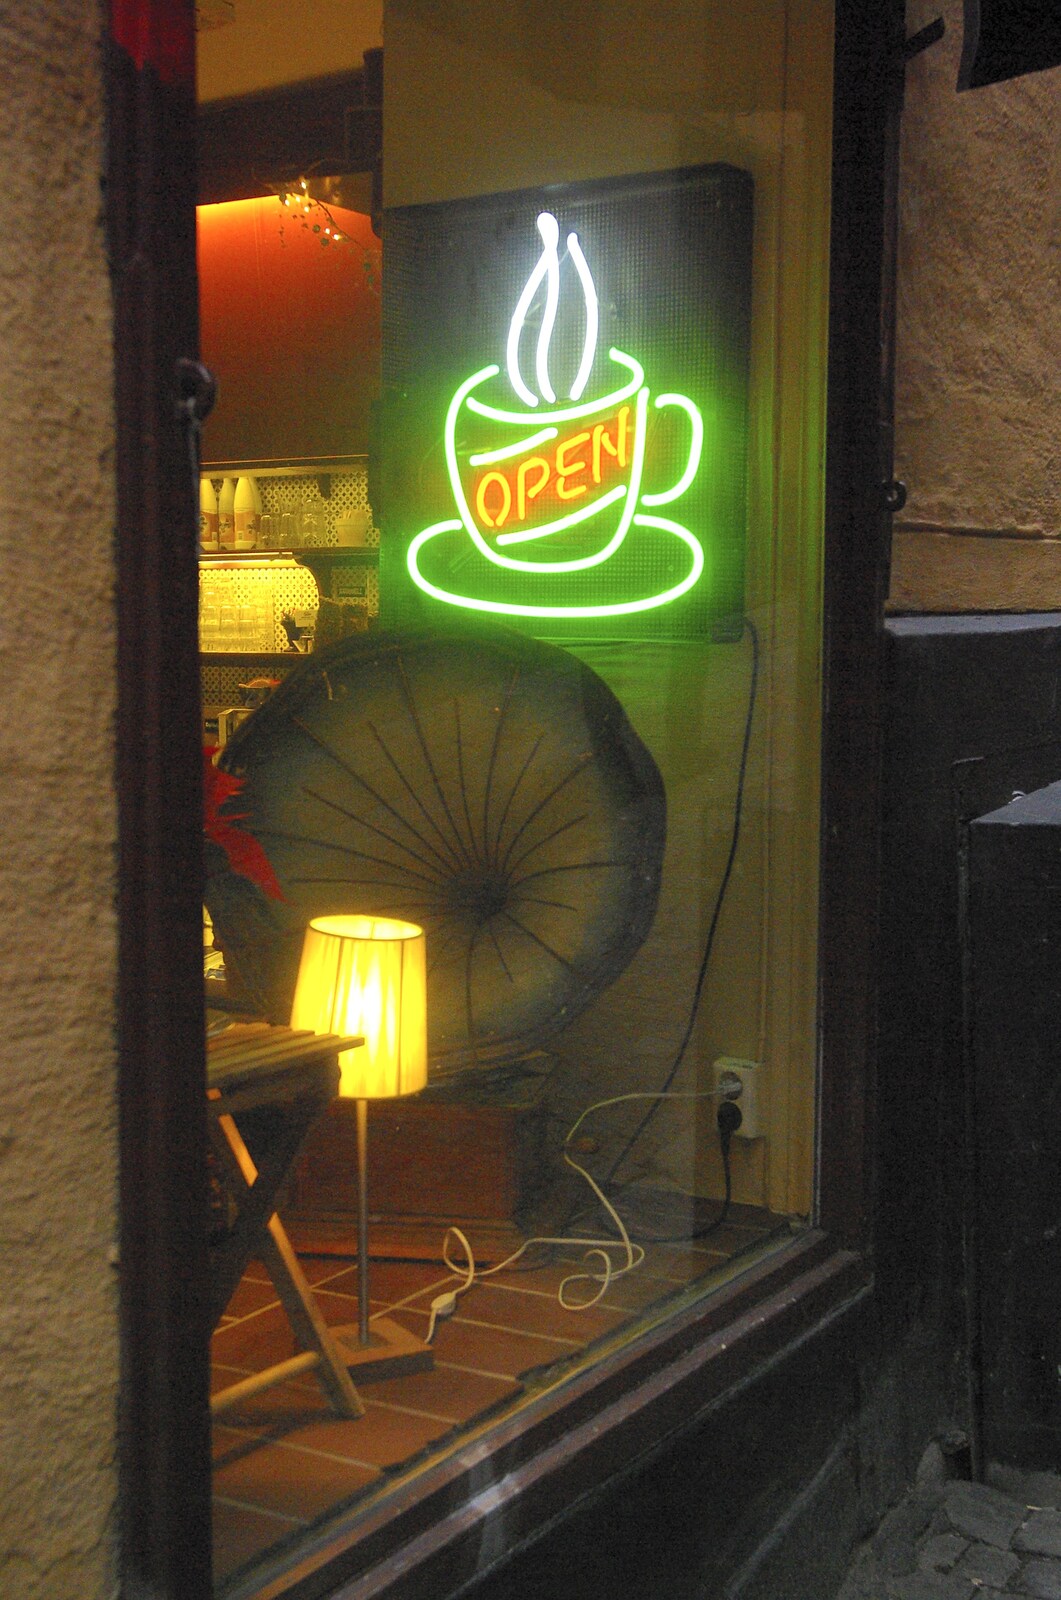 Old gramophone and neon sign, Gamla Stan from Gamla Stan, Stockholm, Sweden - 15th December 2007